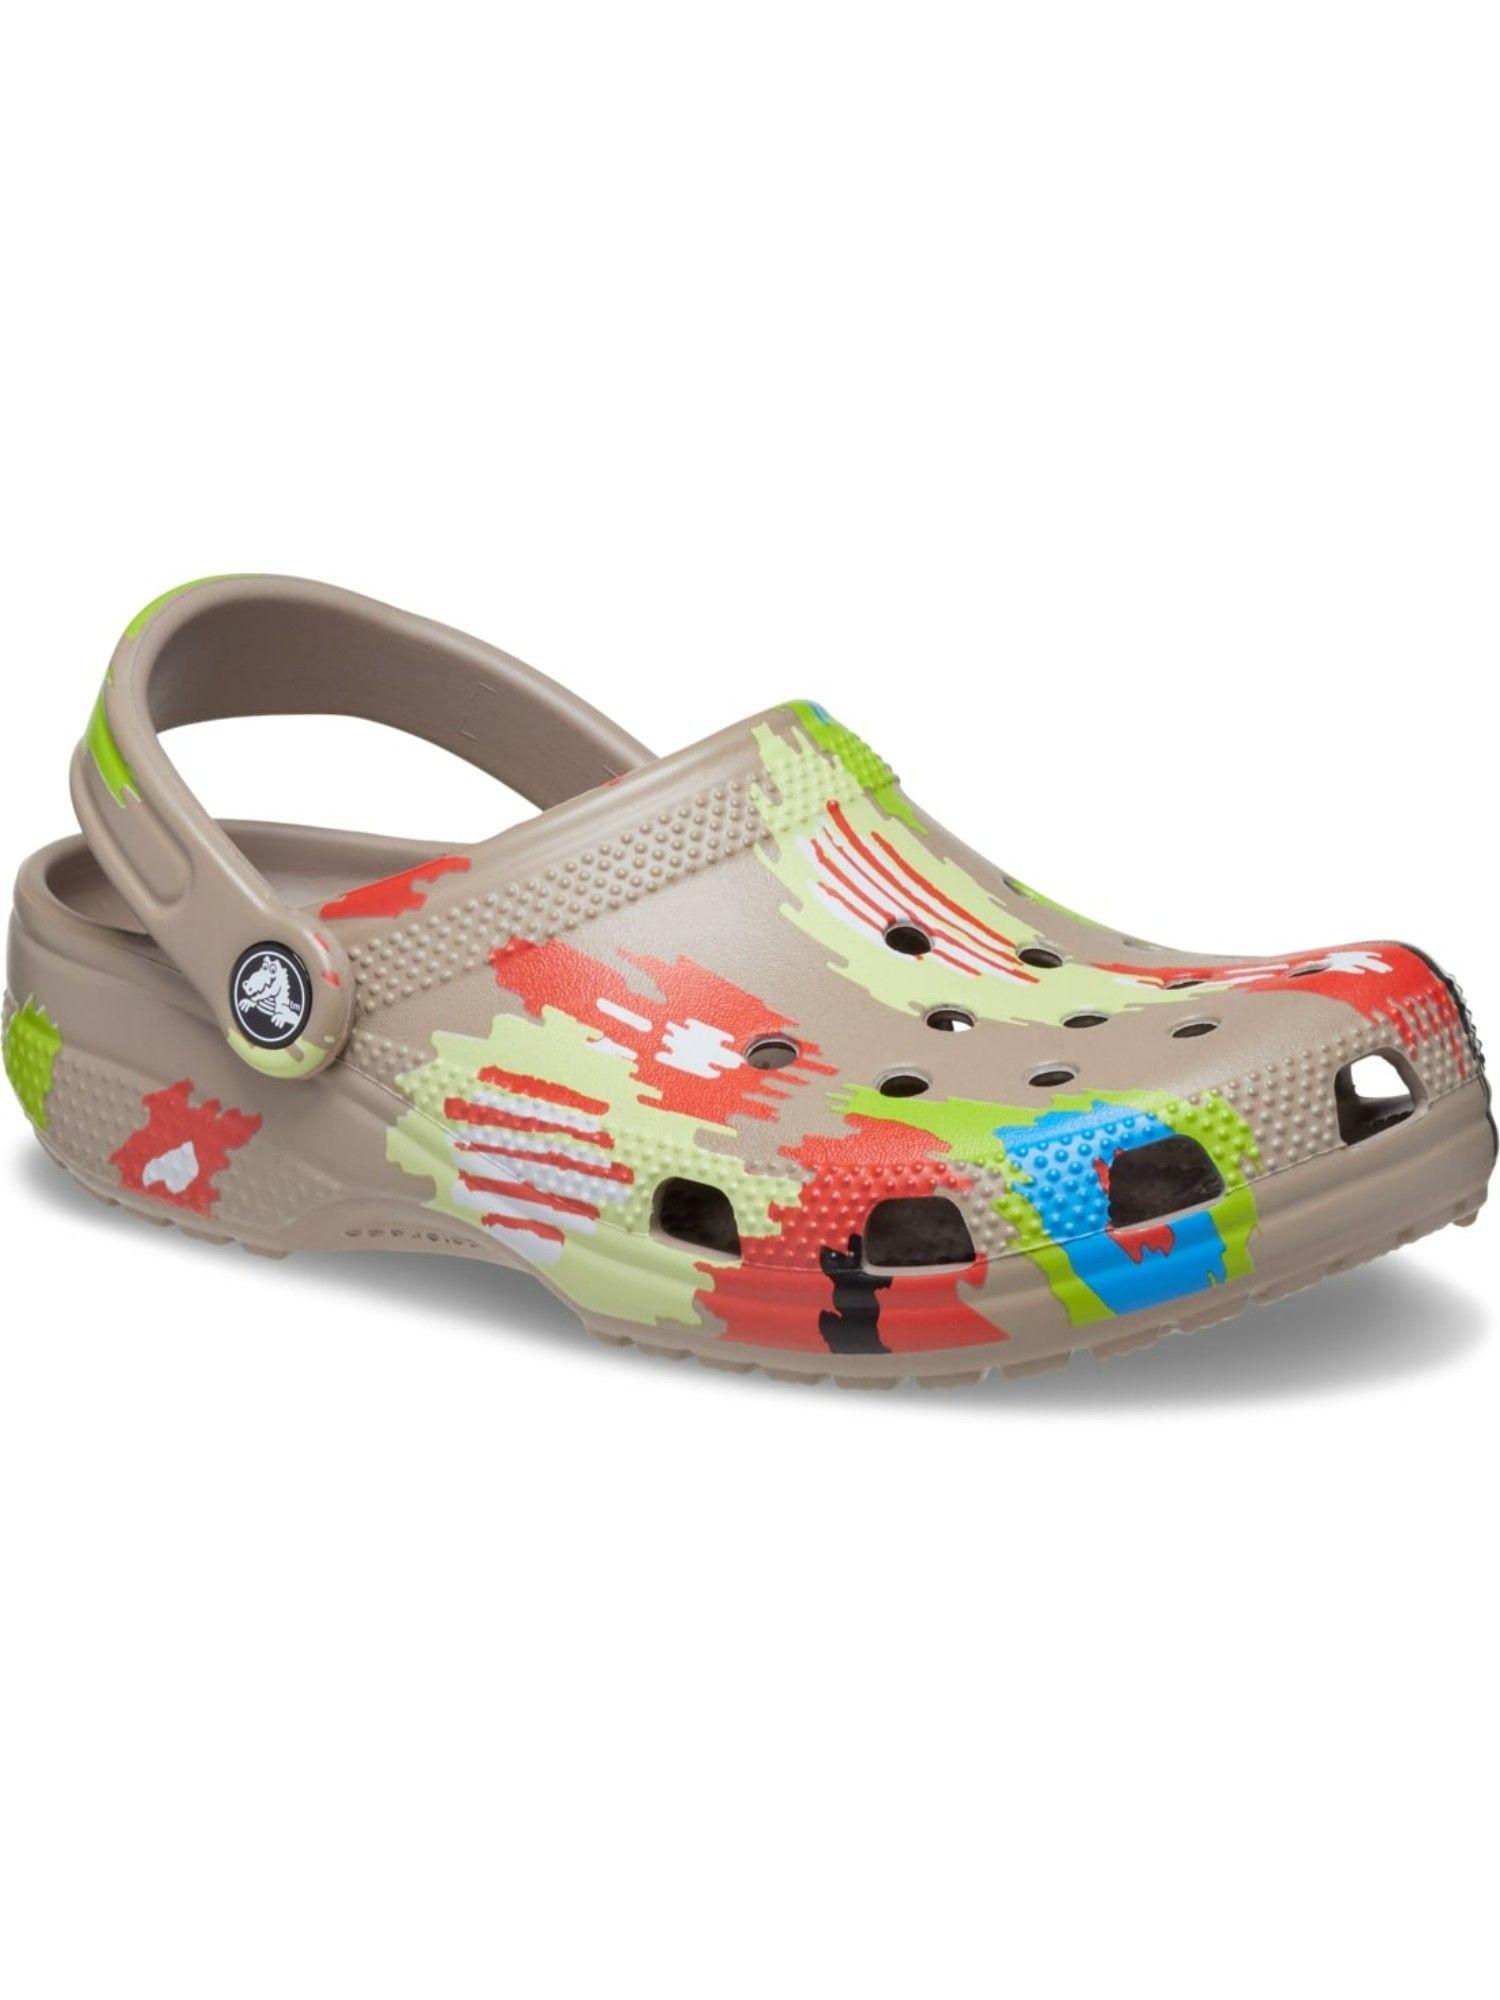 classic-brown-unisex-adults-printed-clog